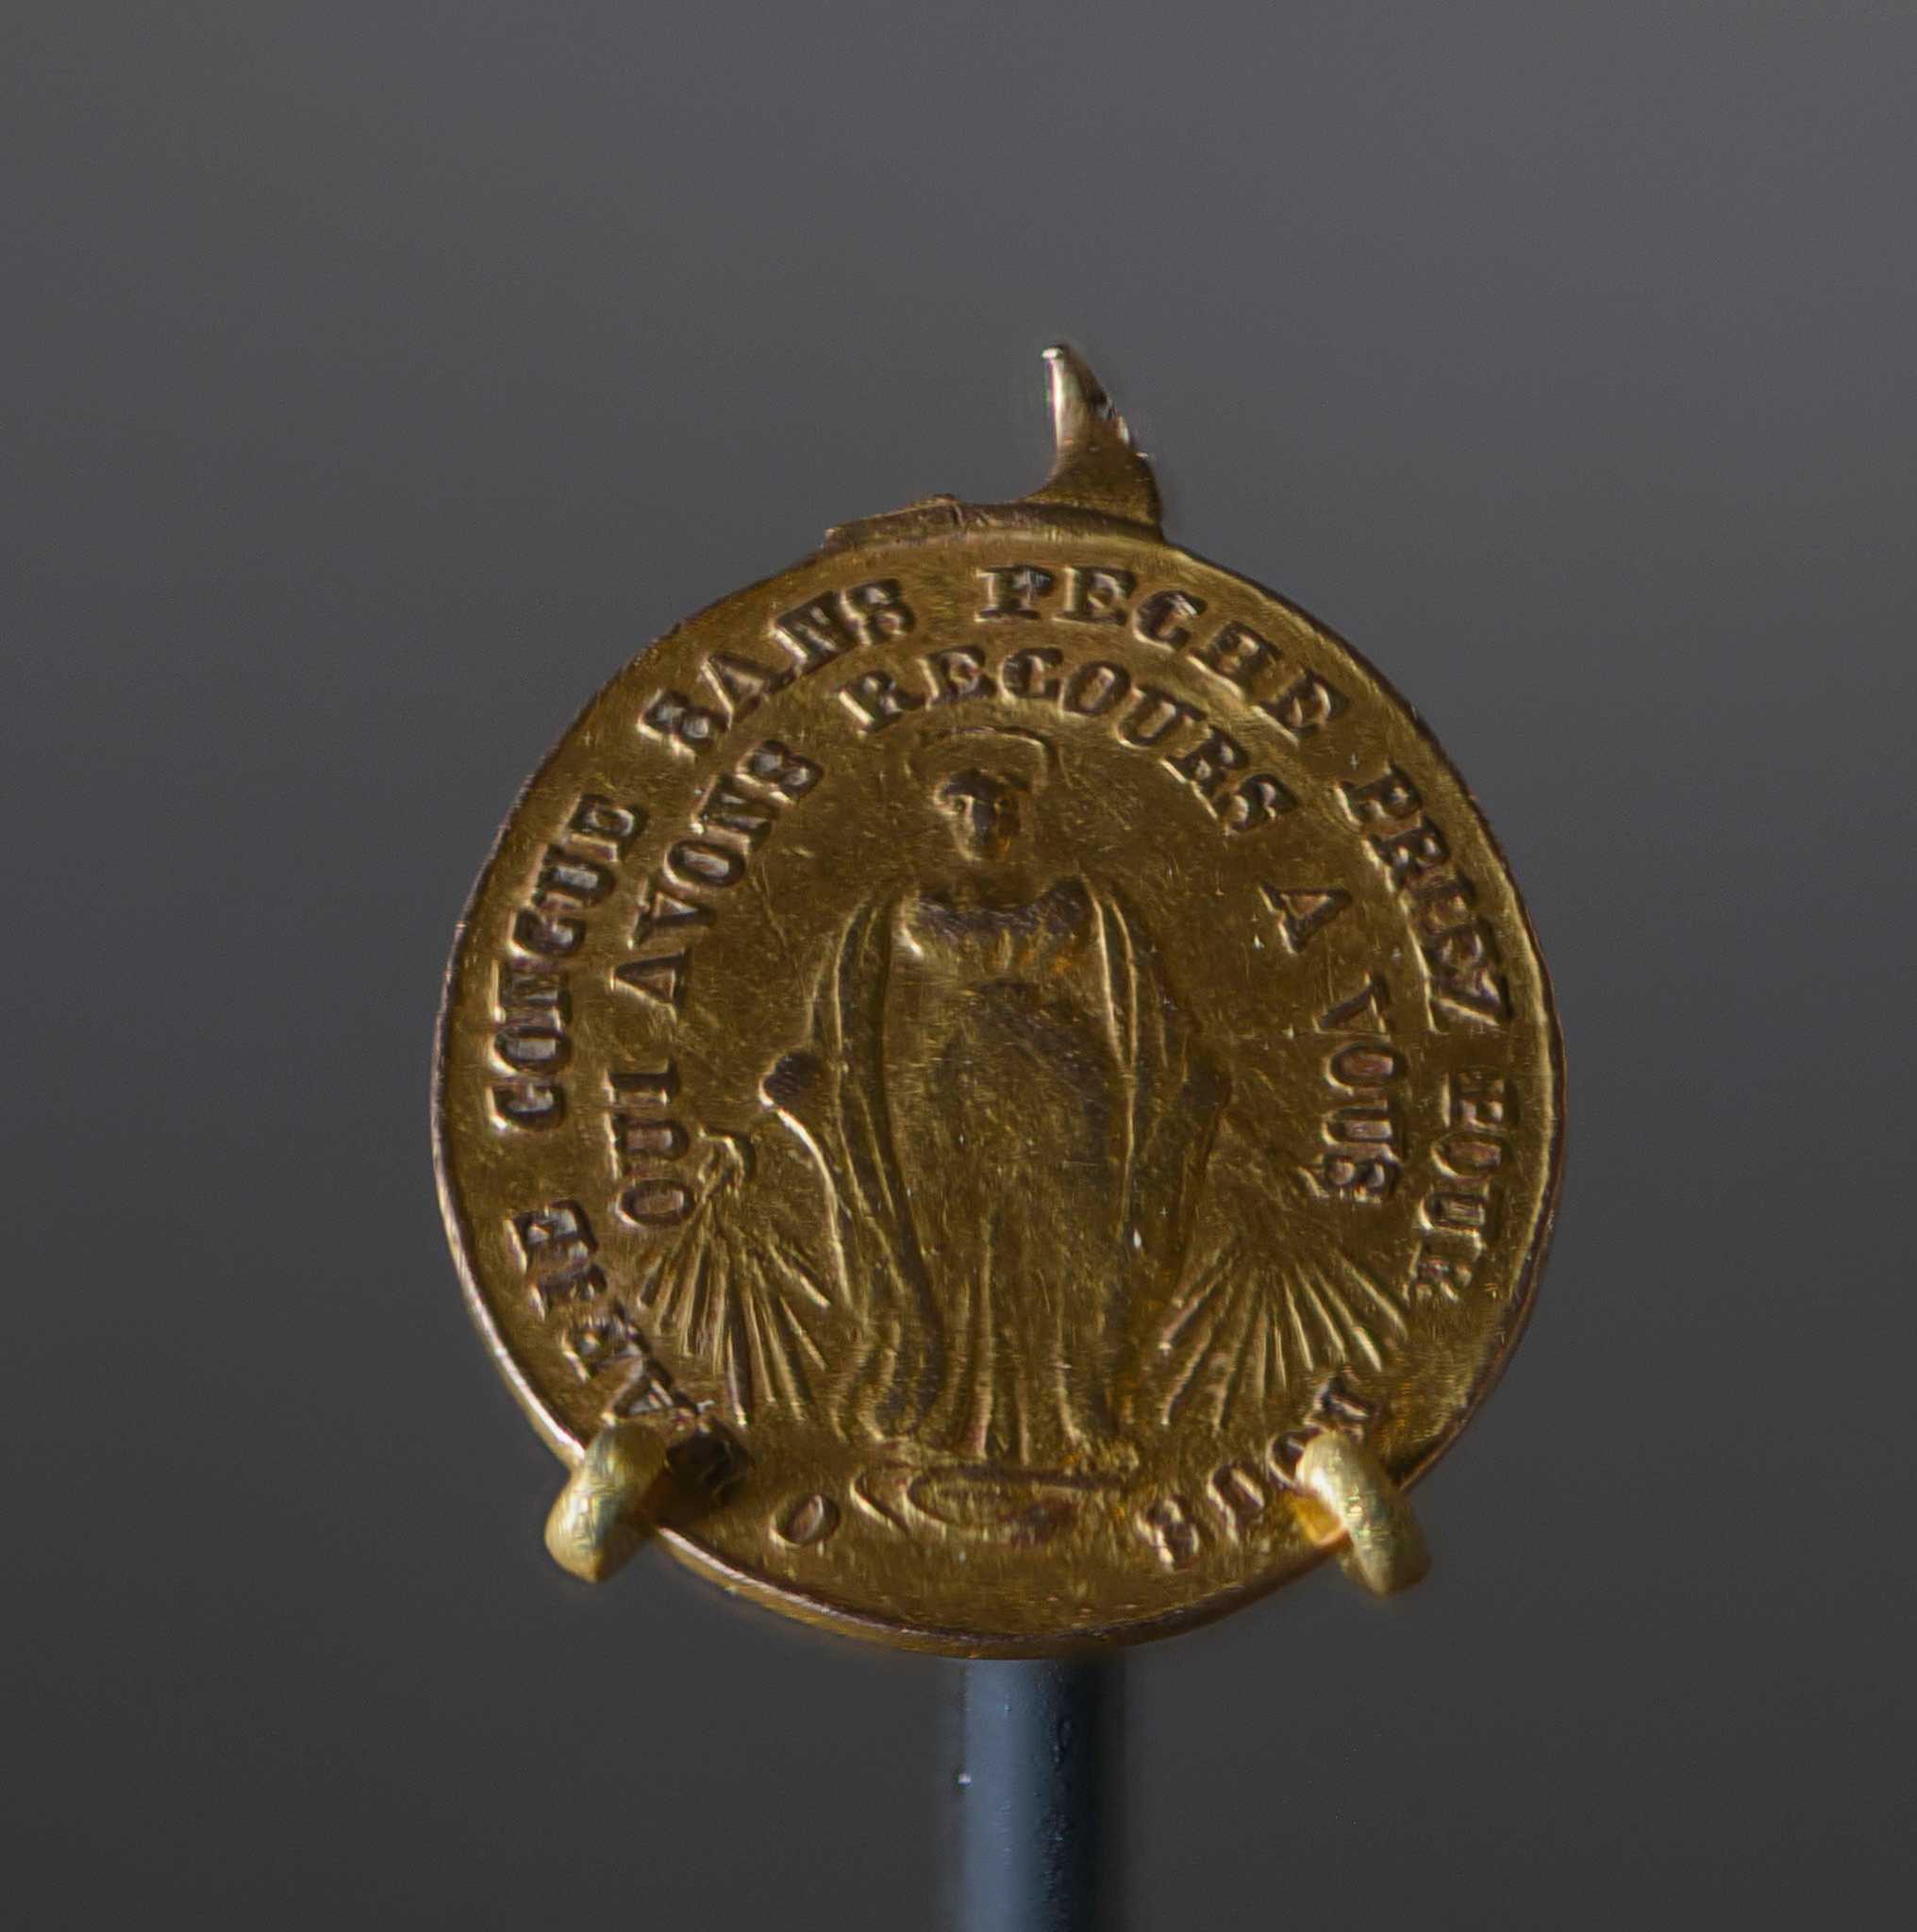 Photograph of a Miraculous Medal